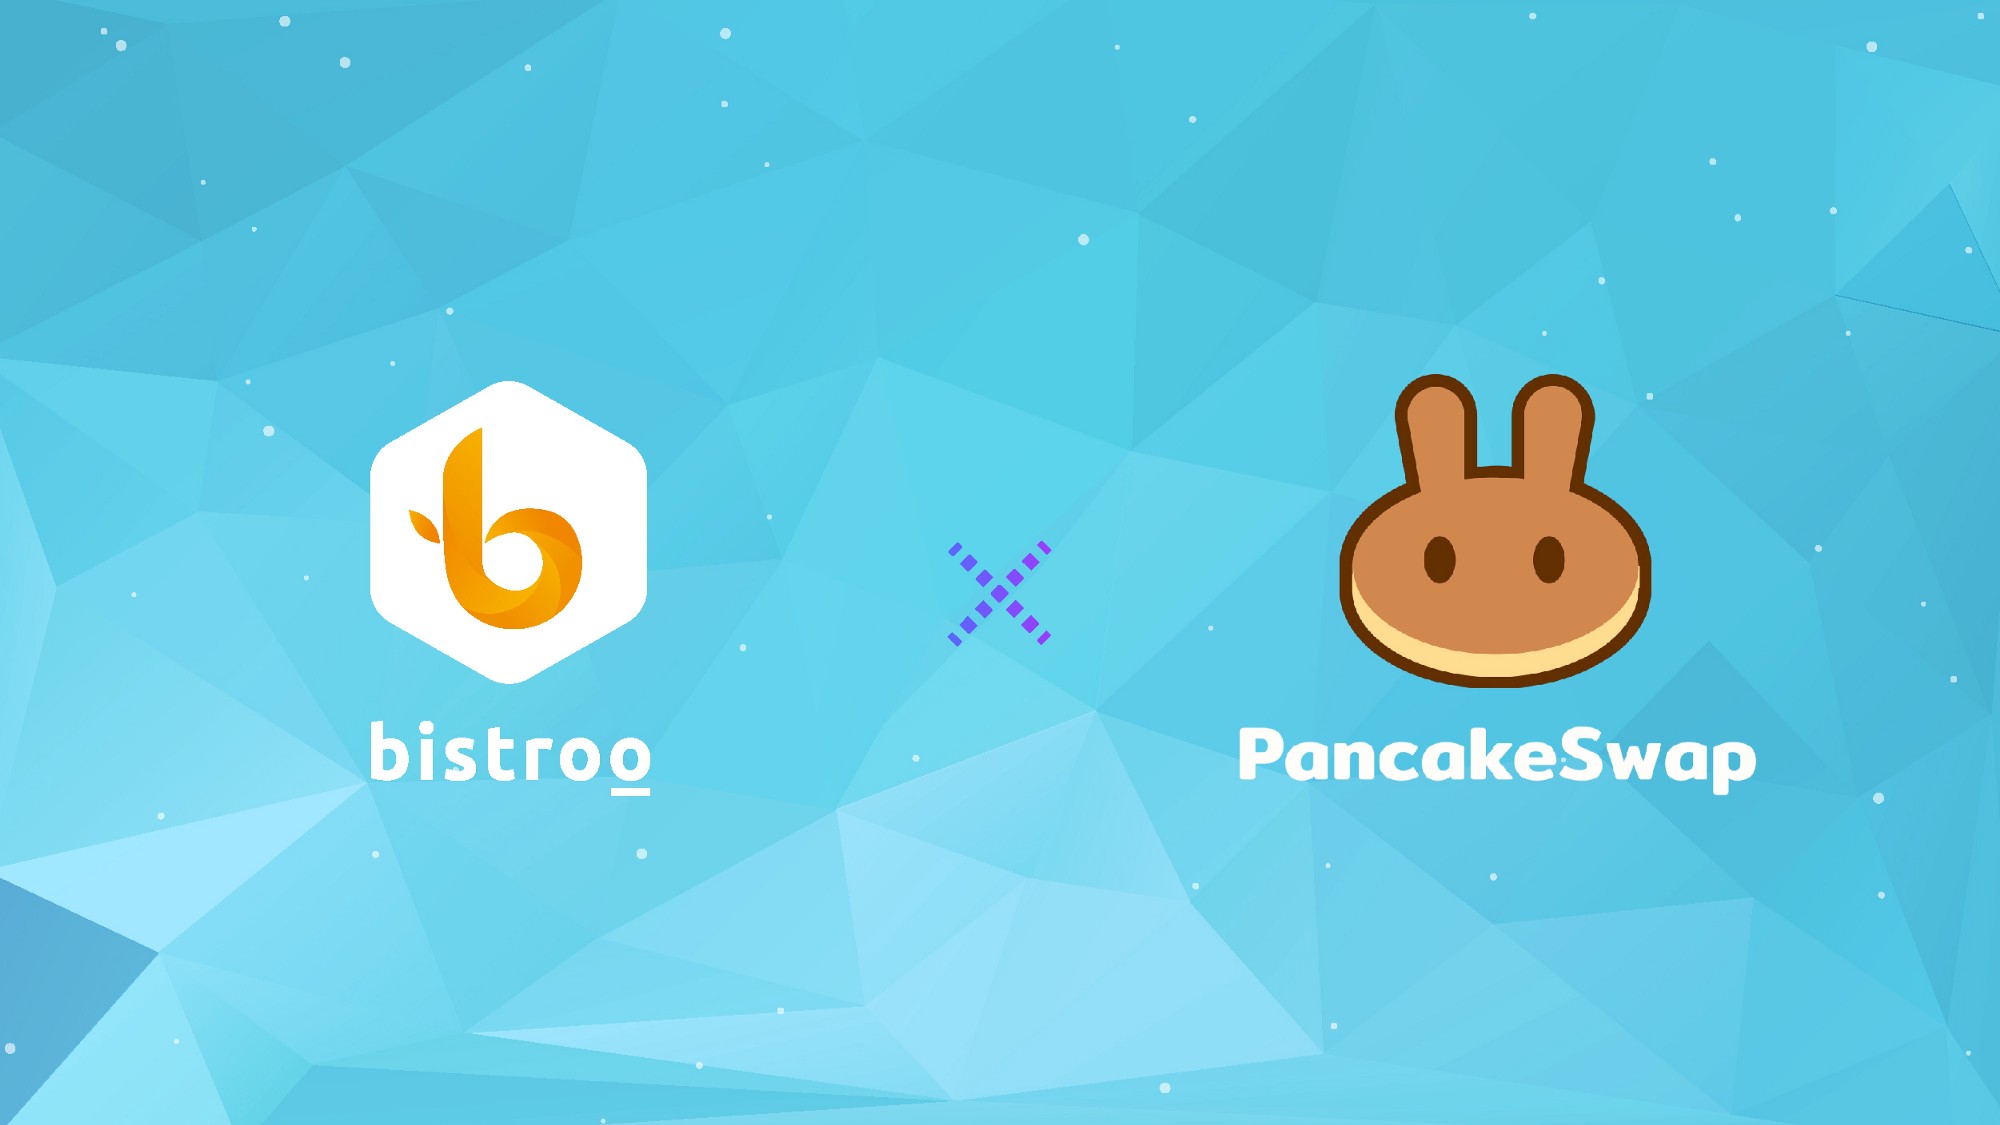 BIST is now available on PancakeSwap!